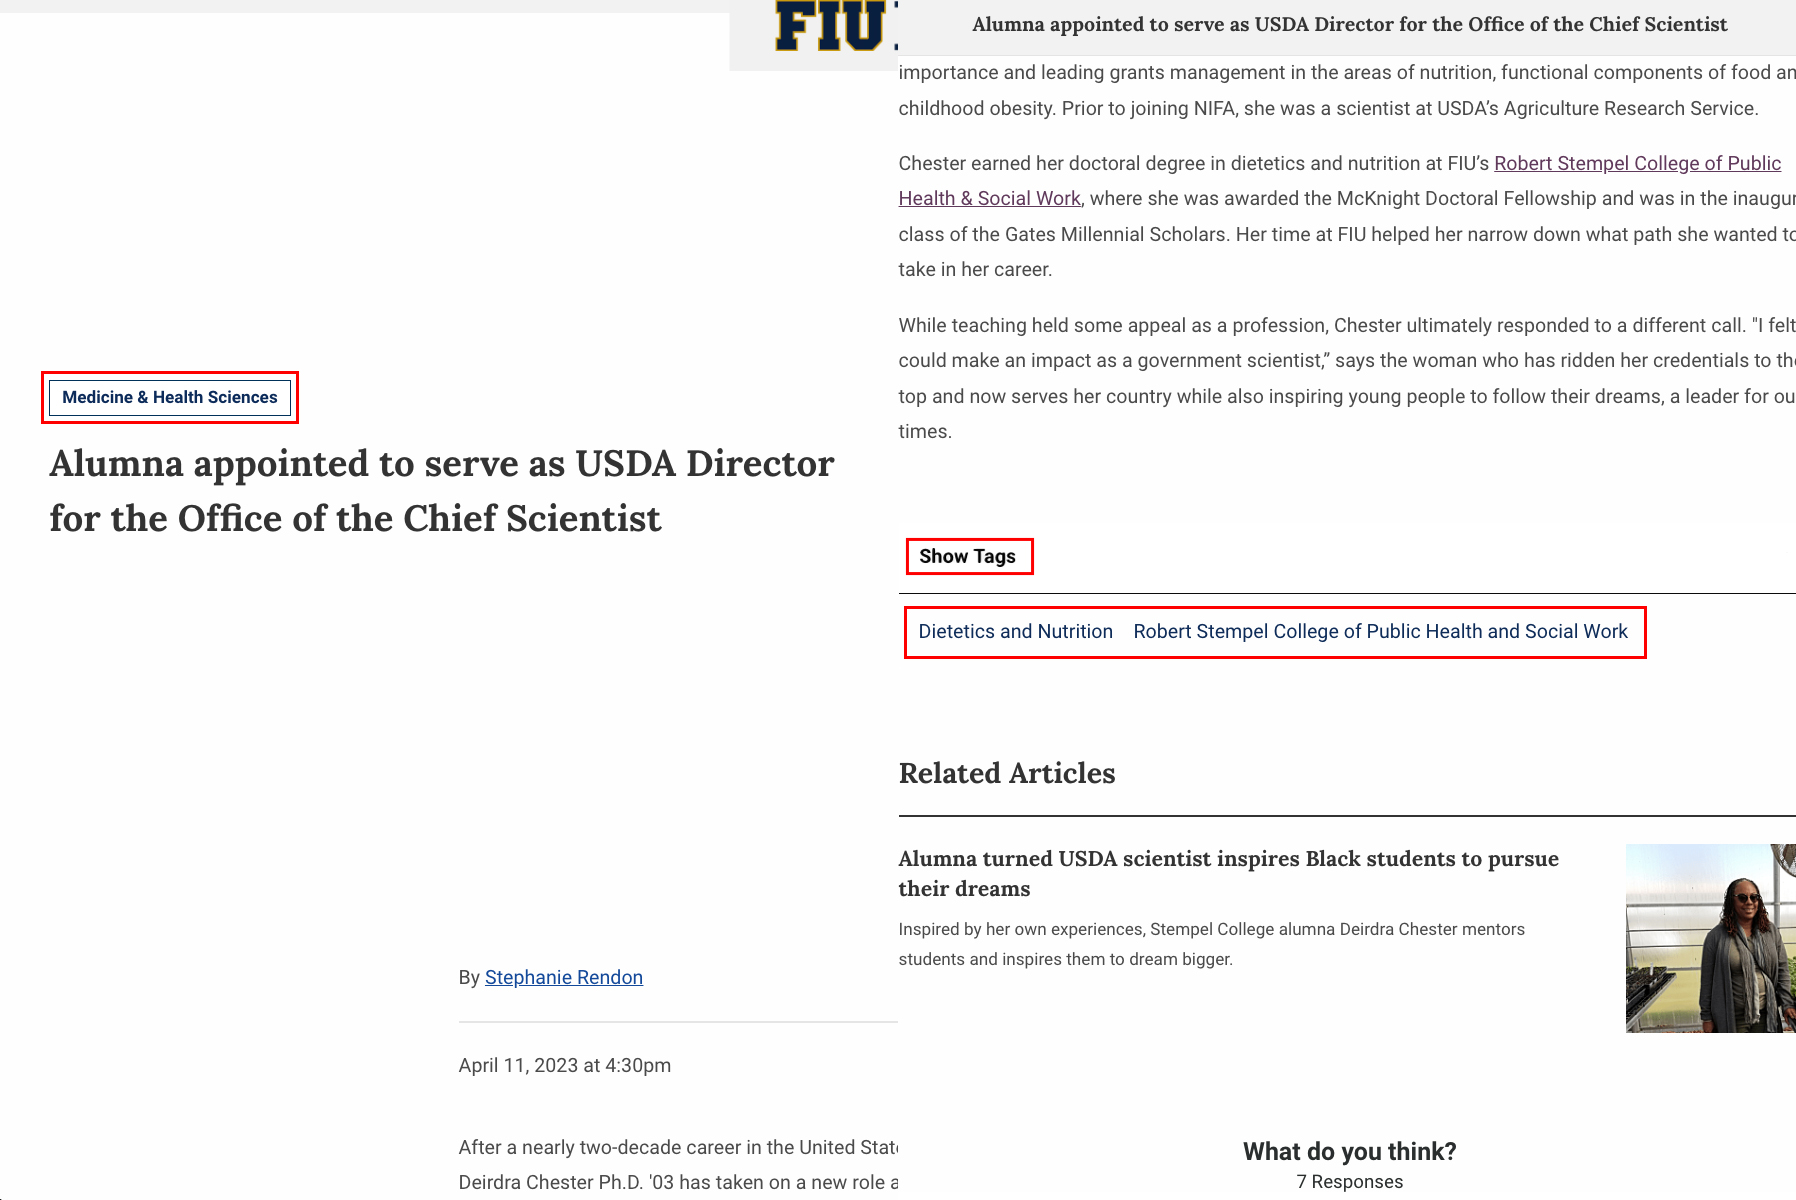 FIU News and categories highlighted